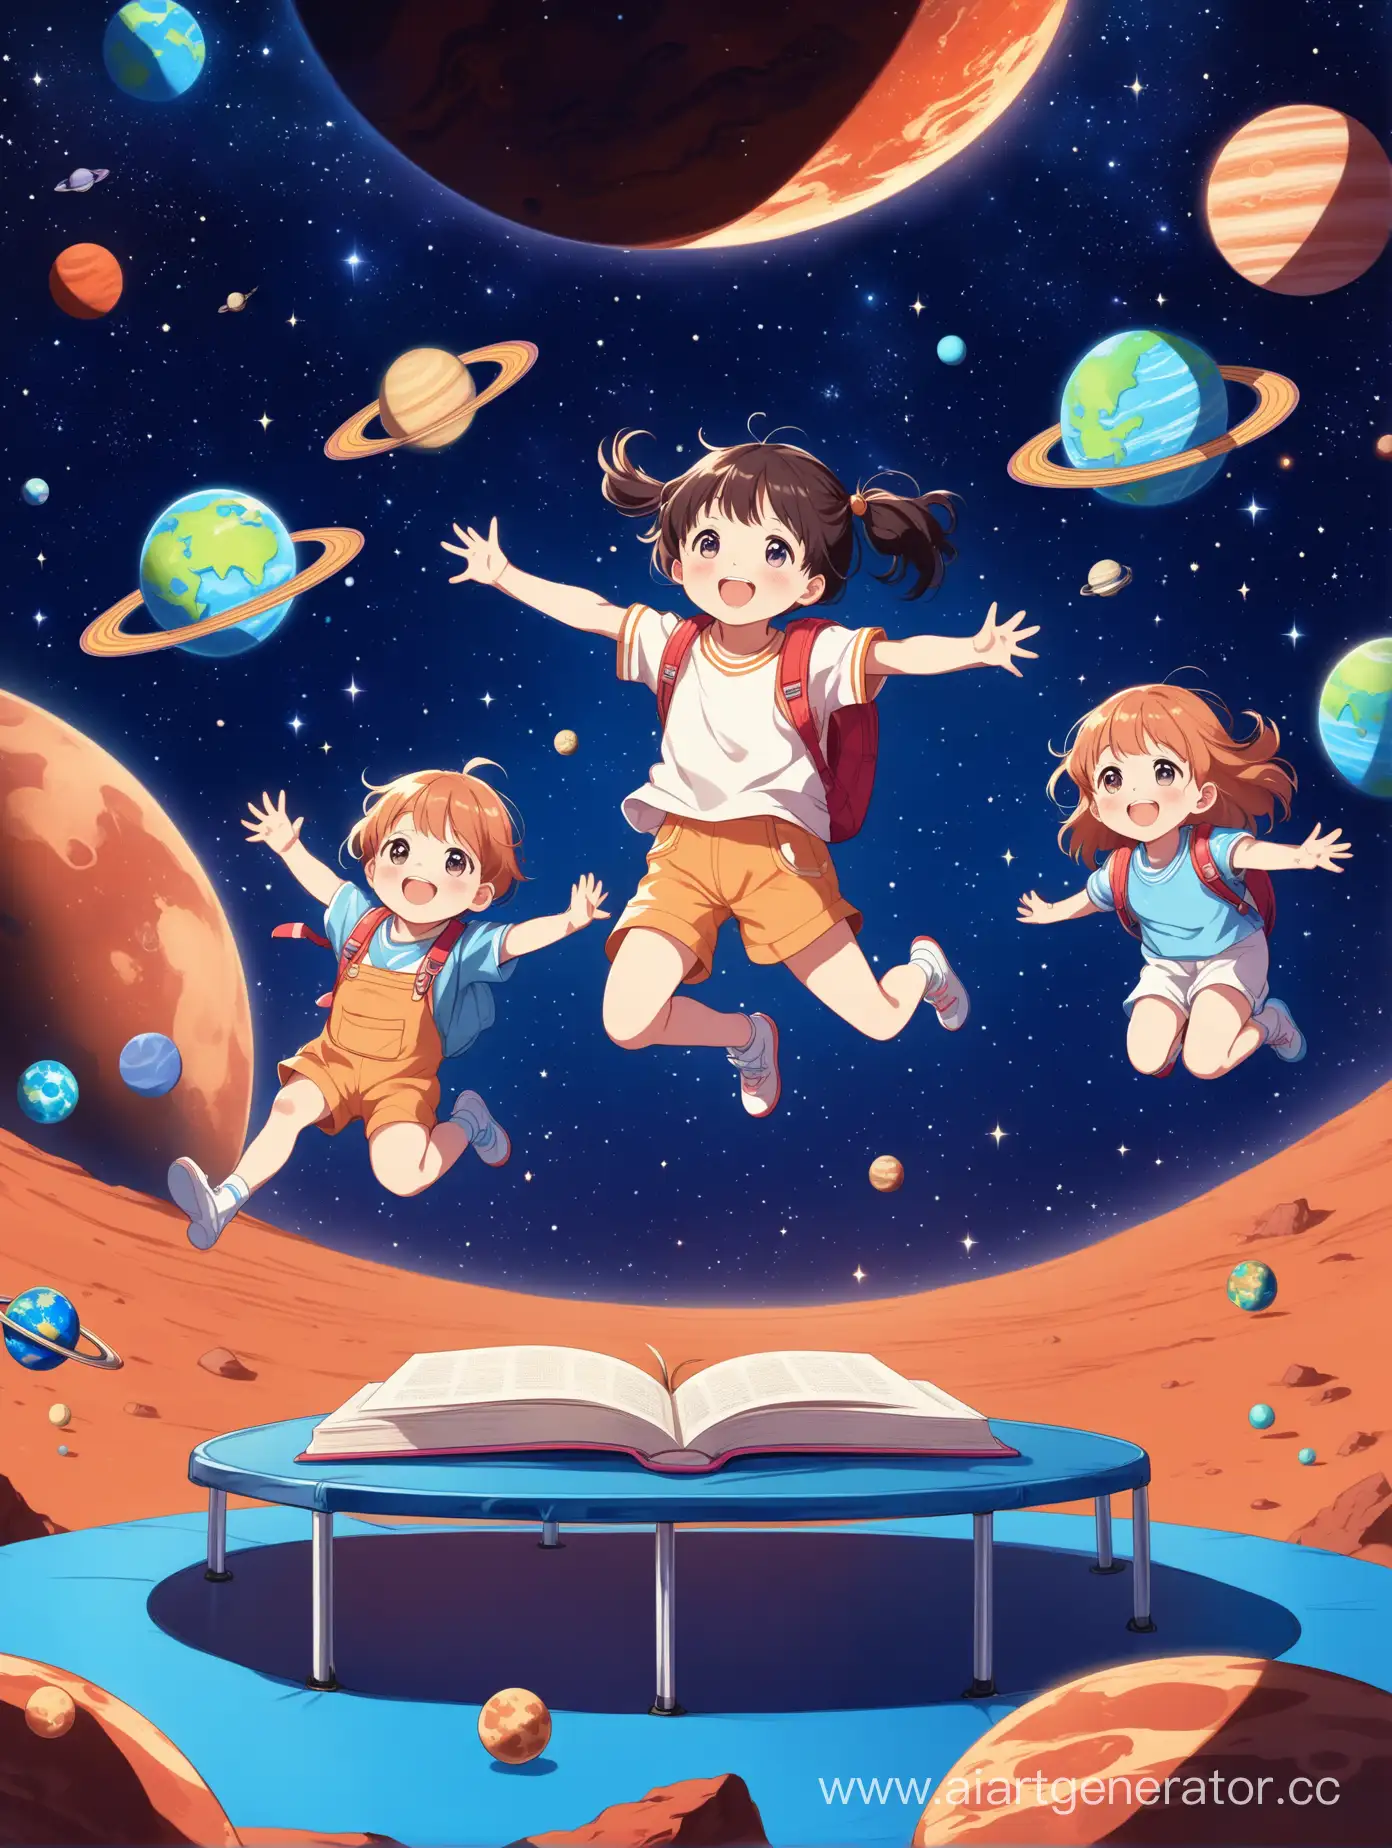 Joyful-Children-Jumping-on-Trampolines-on-Mars-with-Bright-Planets-and-Textbooks